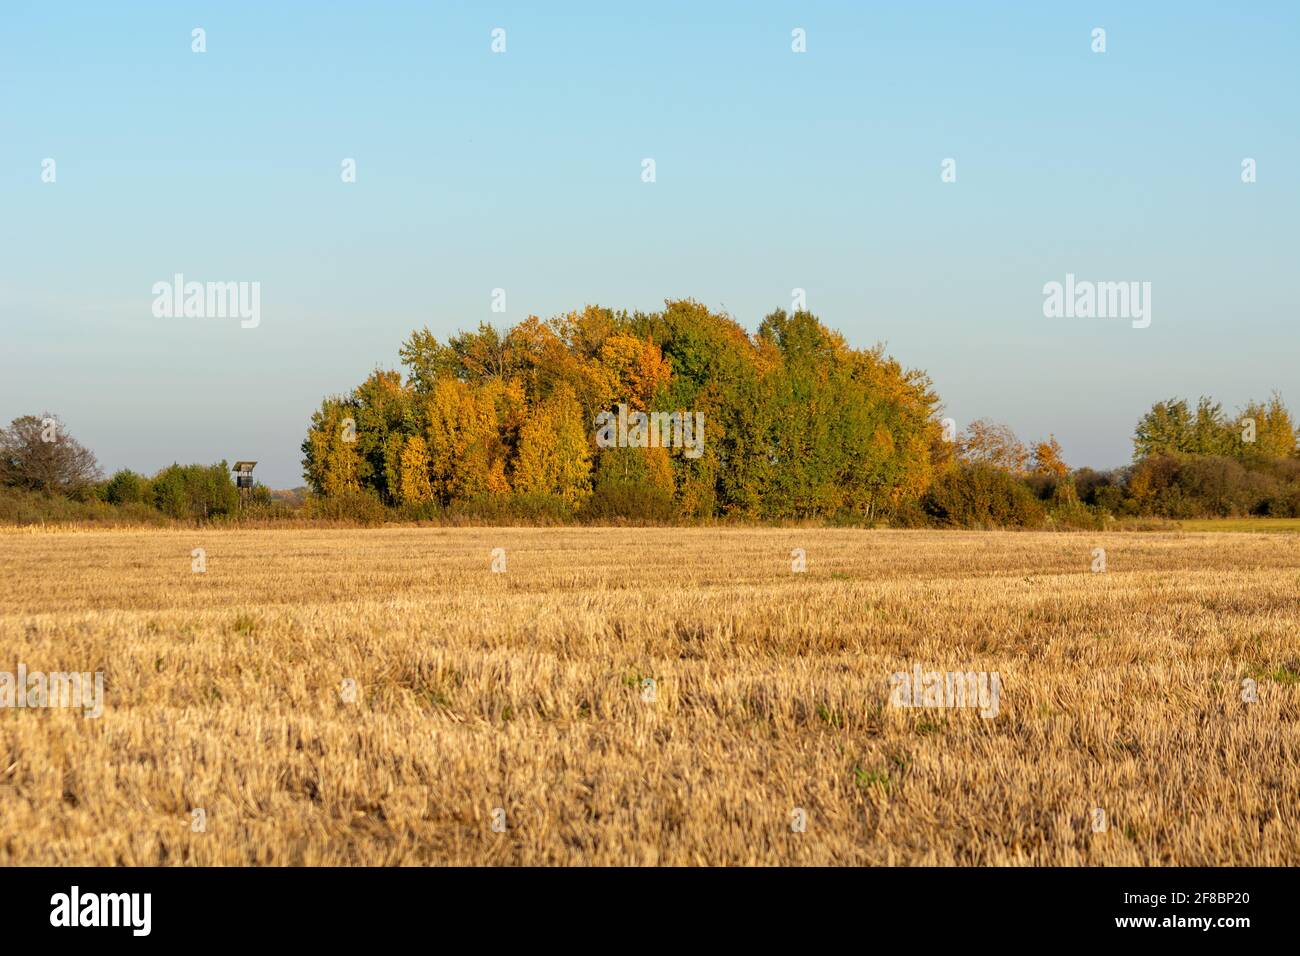 A group of deciduous trees growing in a field, autumnal sunny view Stock Photo